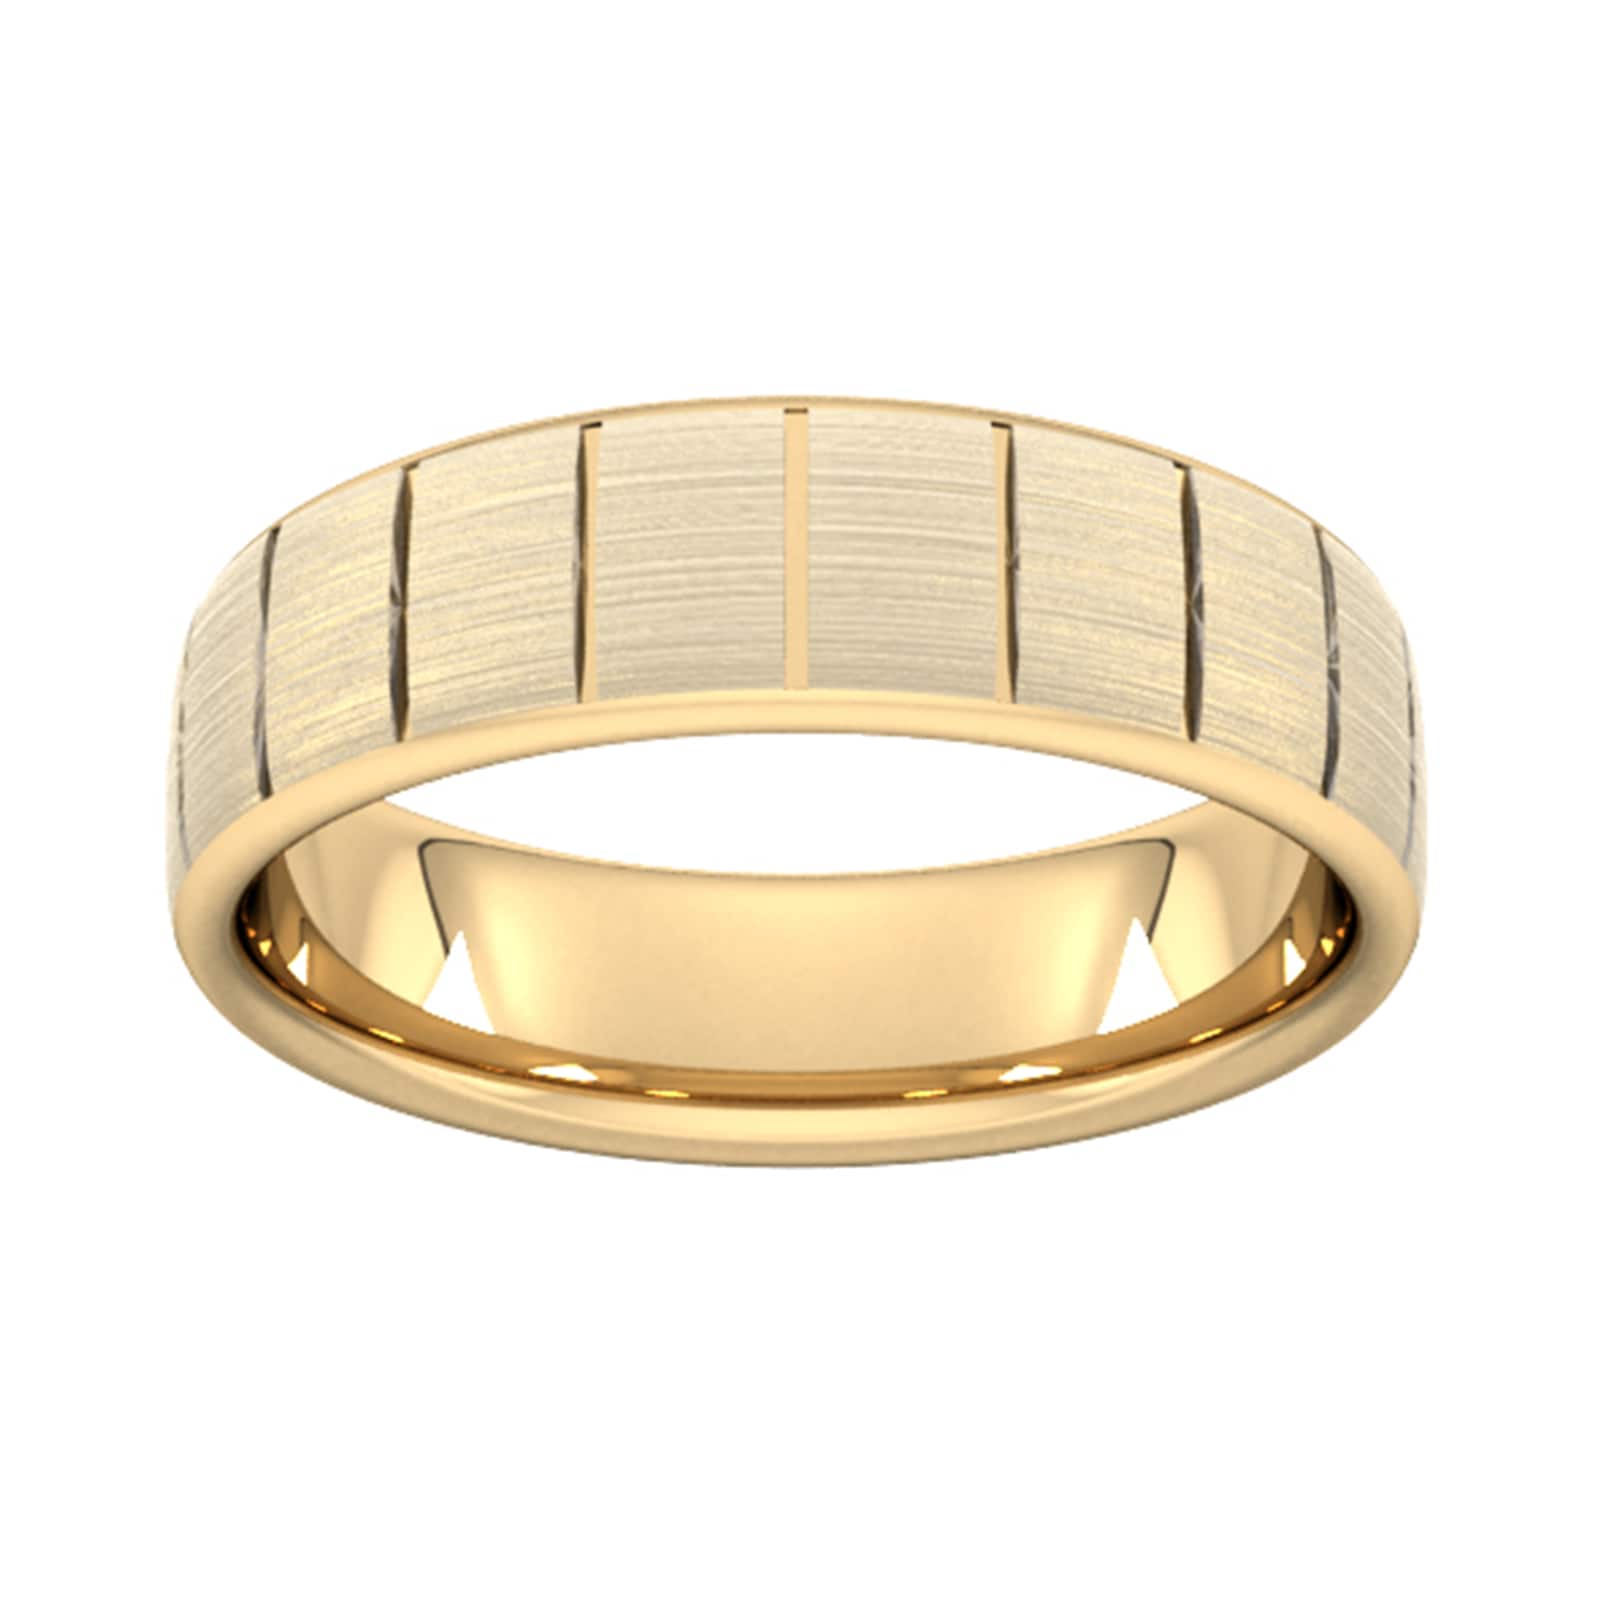 6mm Slight Court Heavy Vertical Lines Wedding Ring In 18 Carat Yellow Gold - Ring Size I